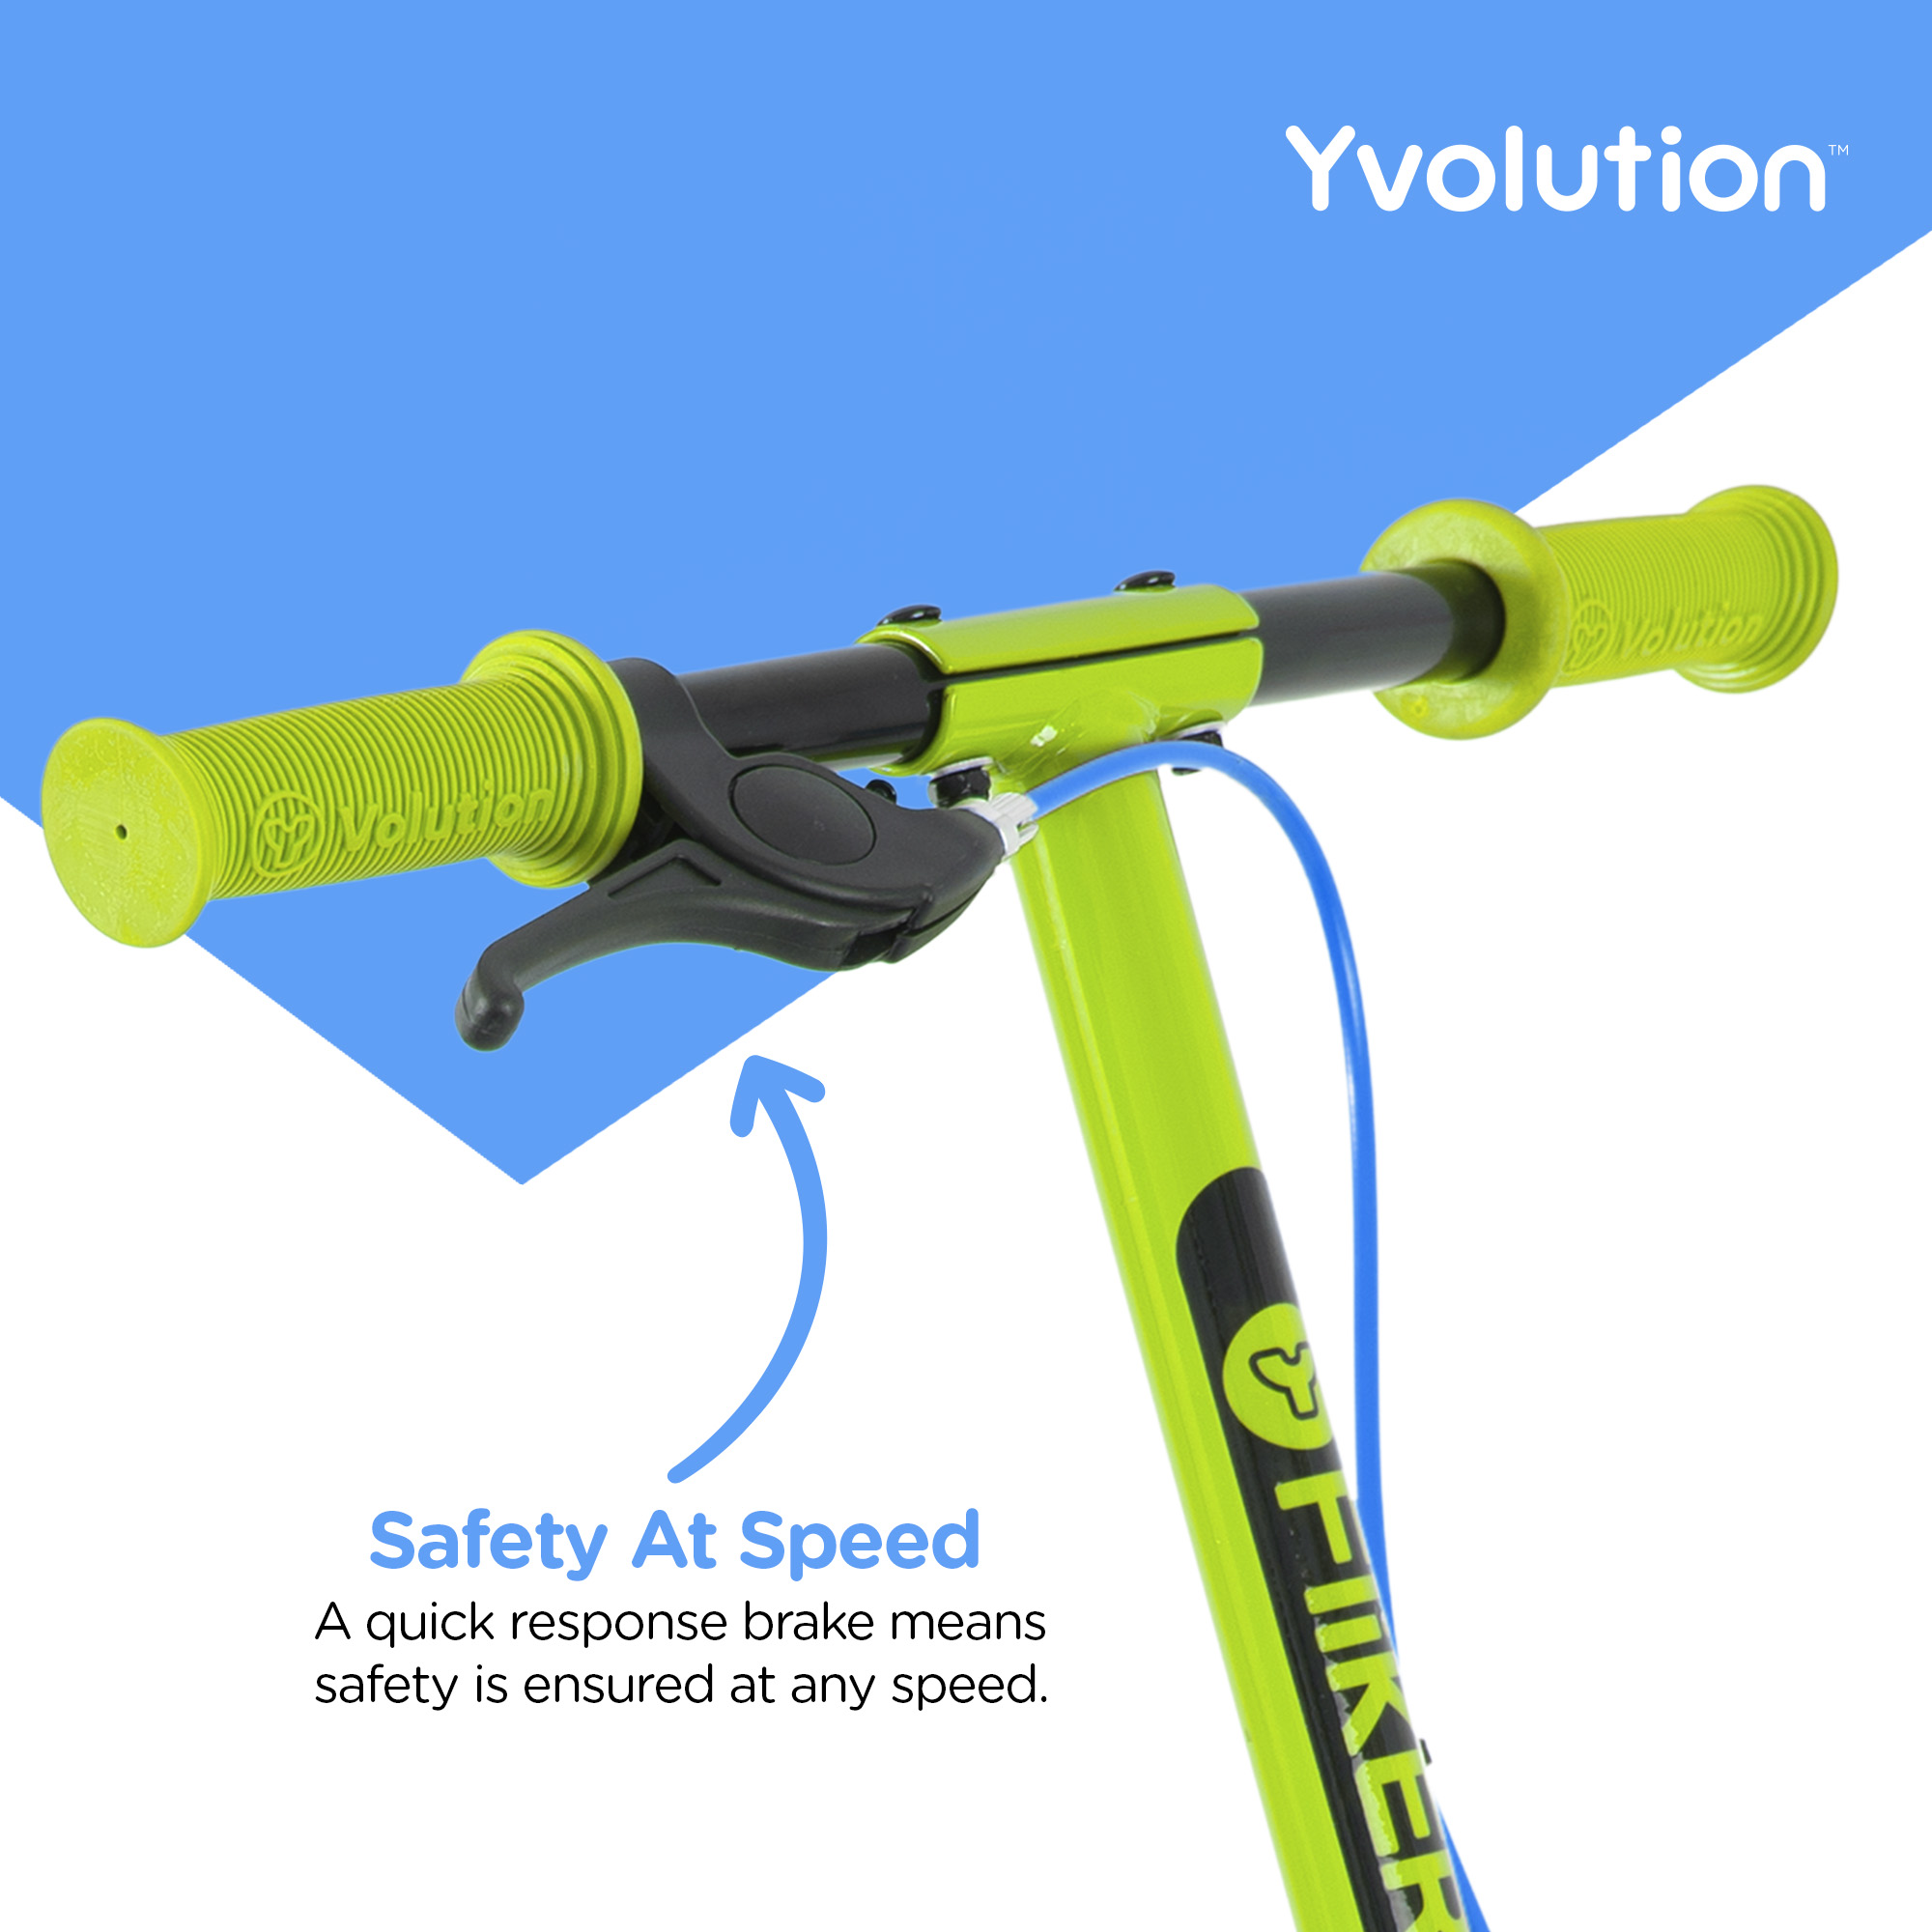 Yvolution Y Fliker Air A1 | 3 Wheel Drift Scooter for Kids Child 5-8 Years Old (Green) Unisex - image 5 of 7